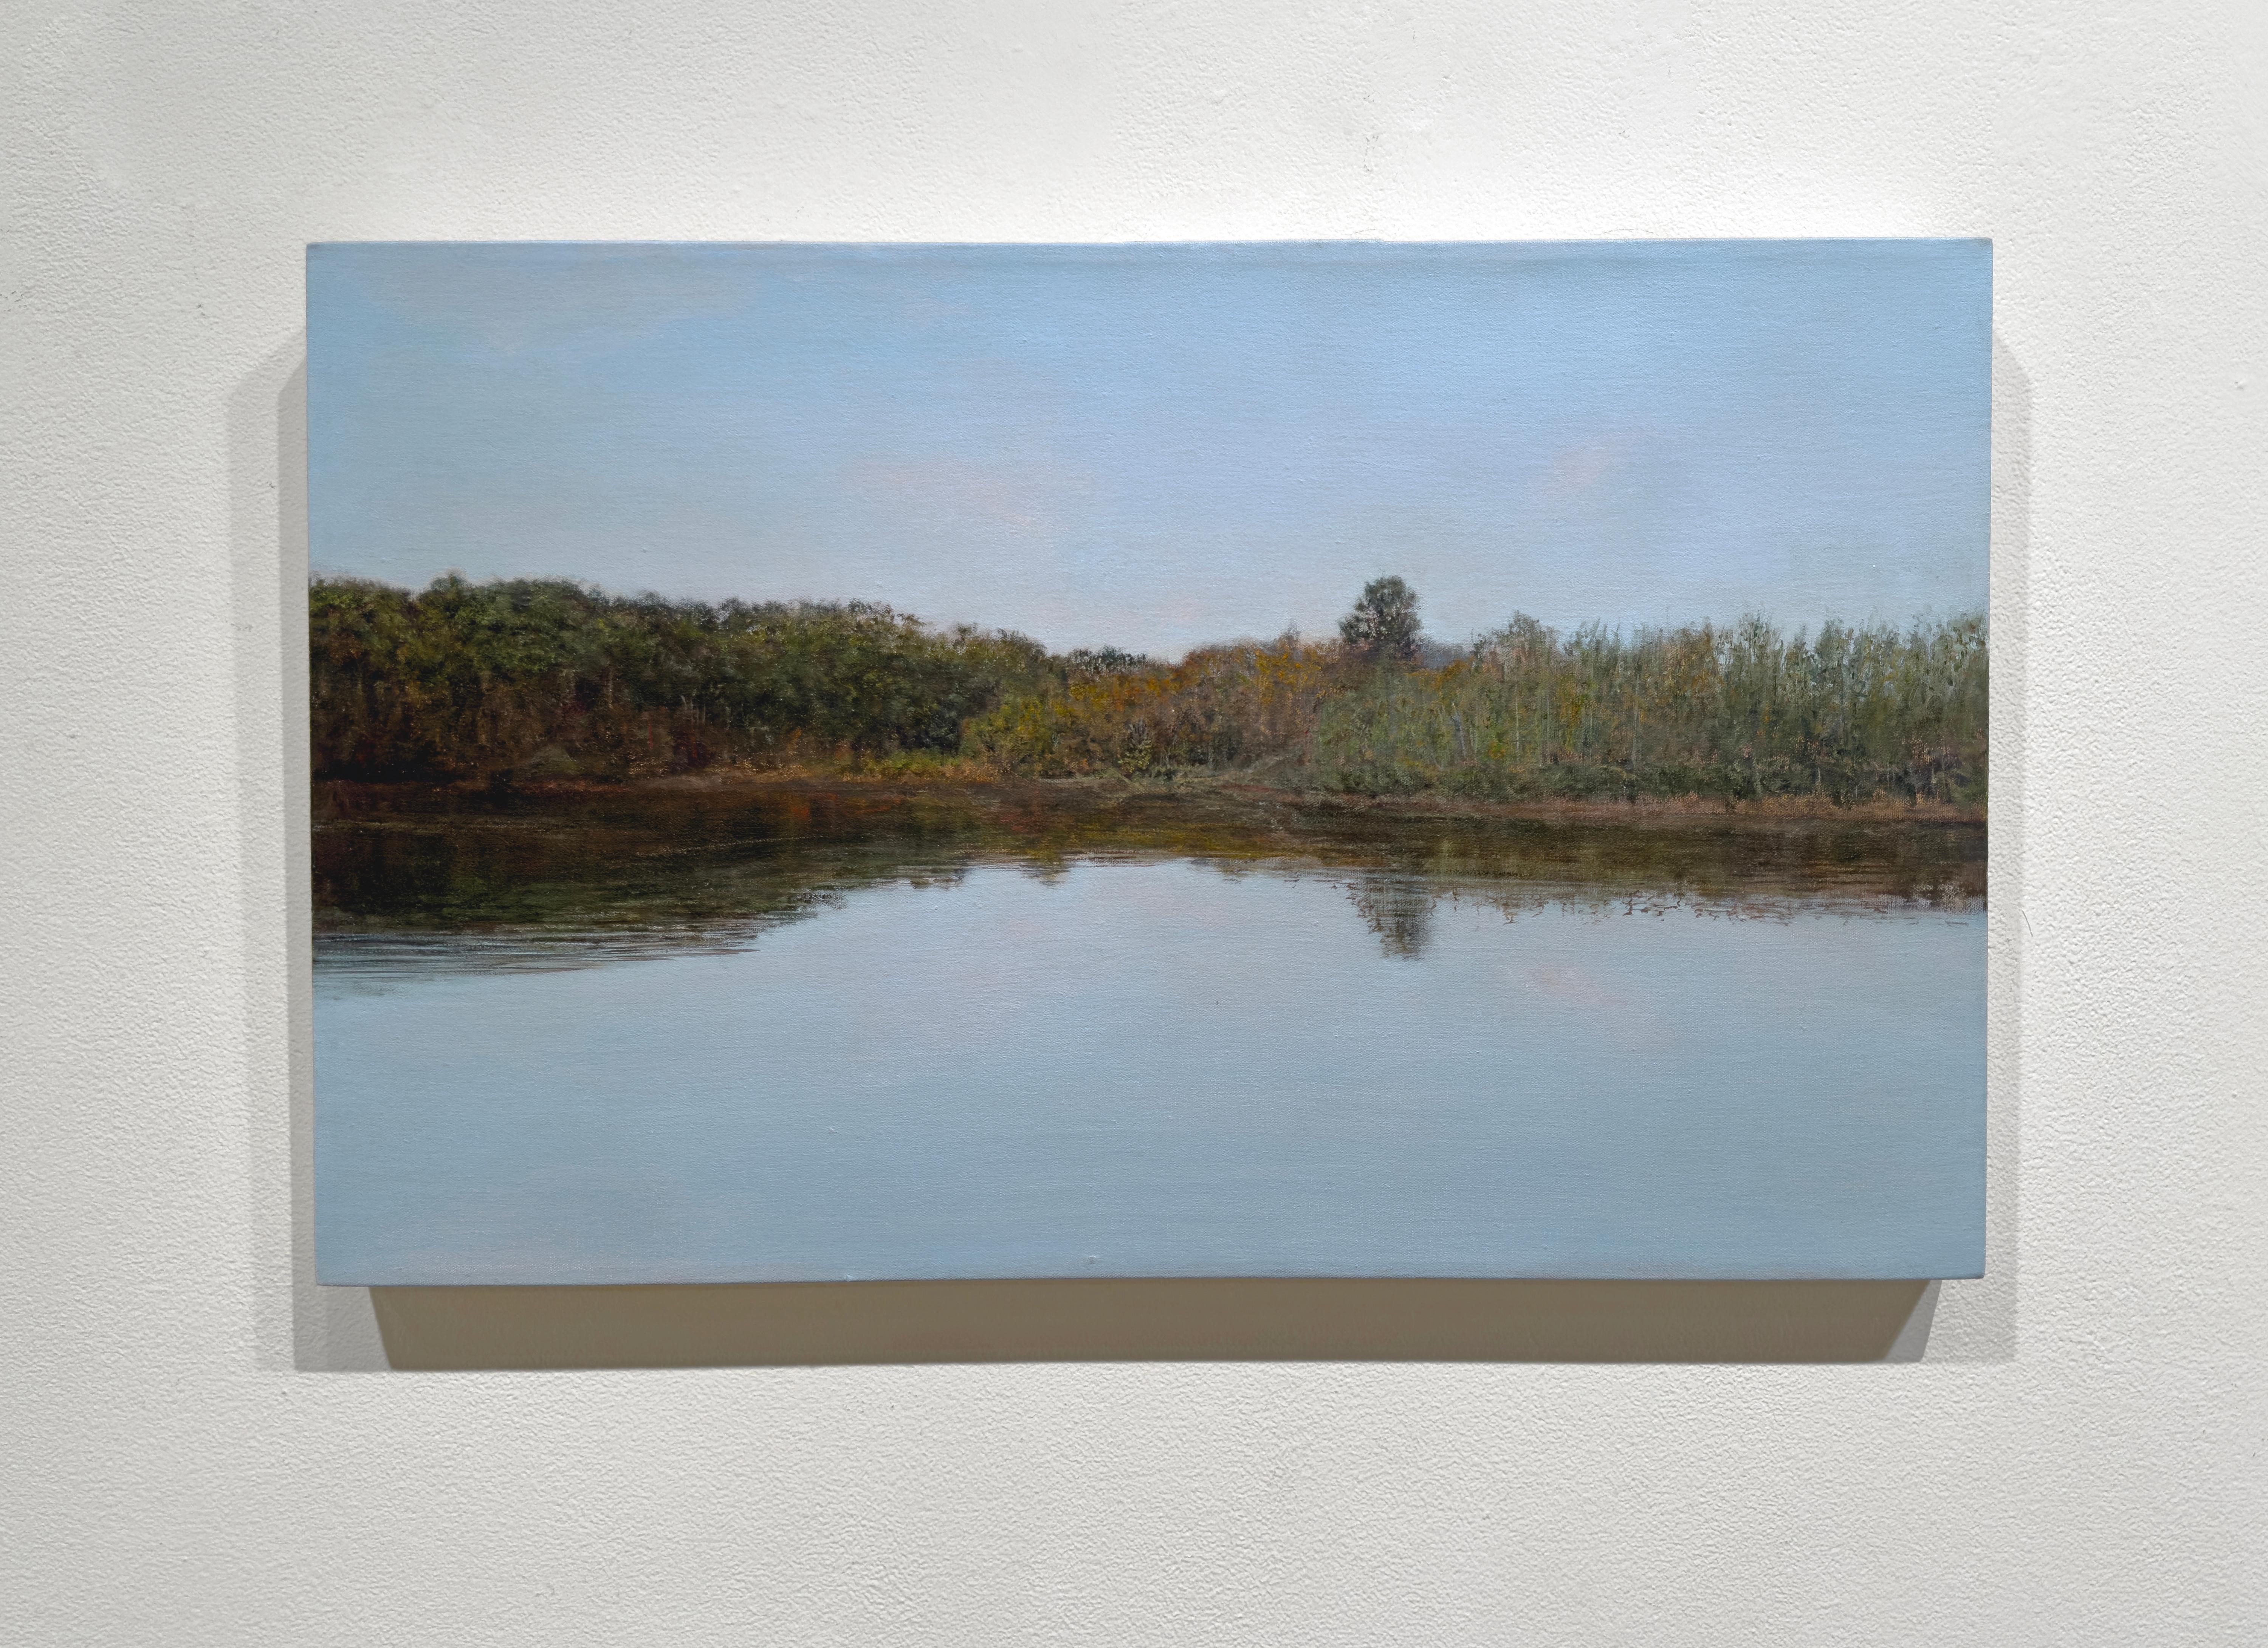 OXBOW LAGOON, SAUGATUCK, MICHIGAN - Landscape/ Realism / Waterscape / Peaceful - Painting by Ben Whitehouse